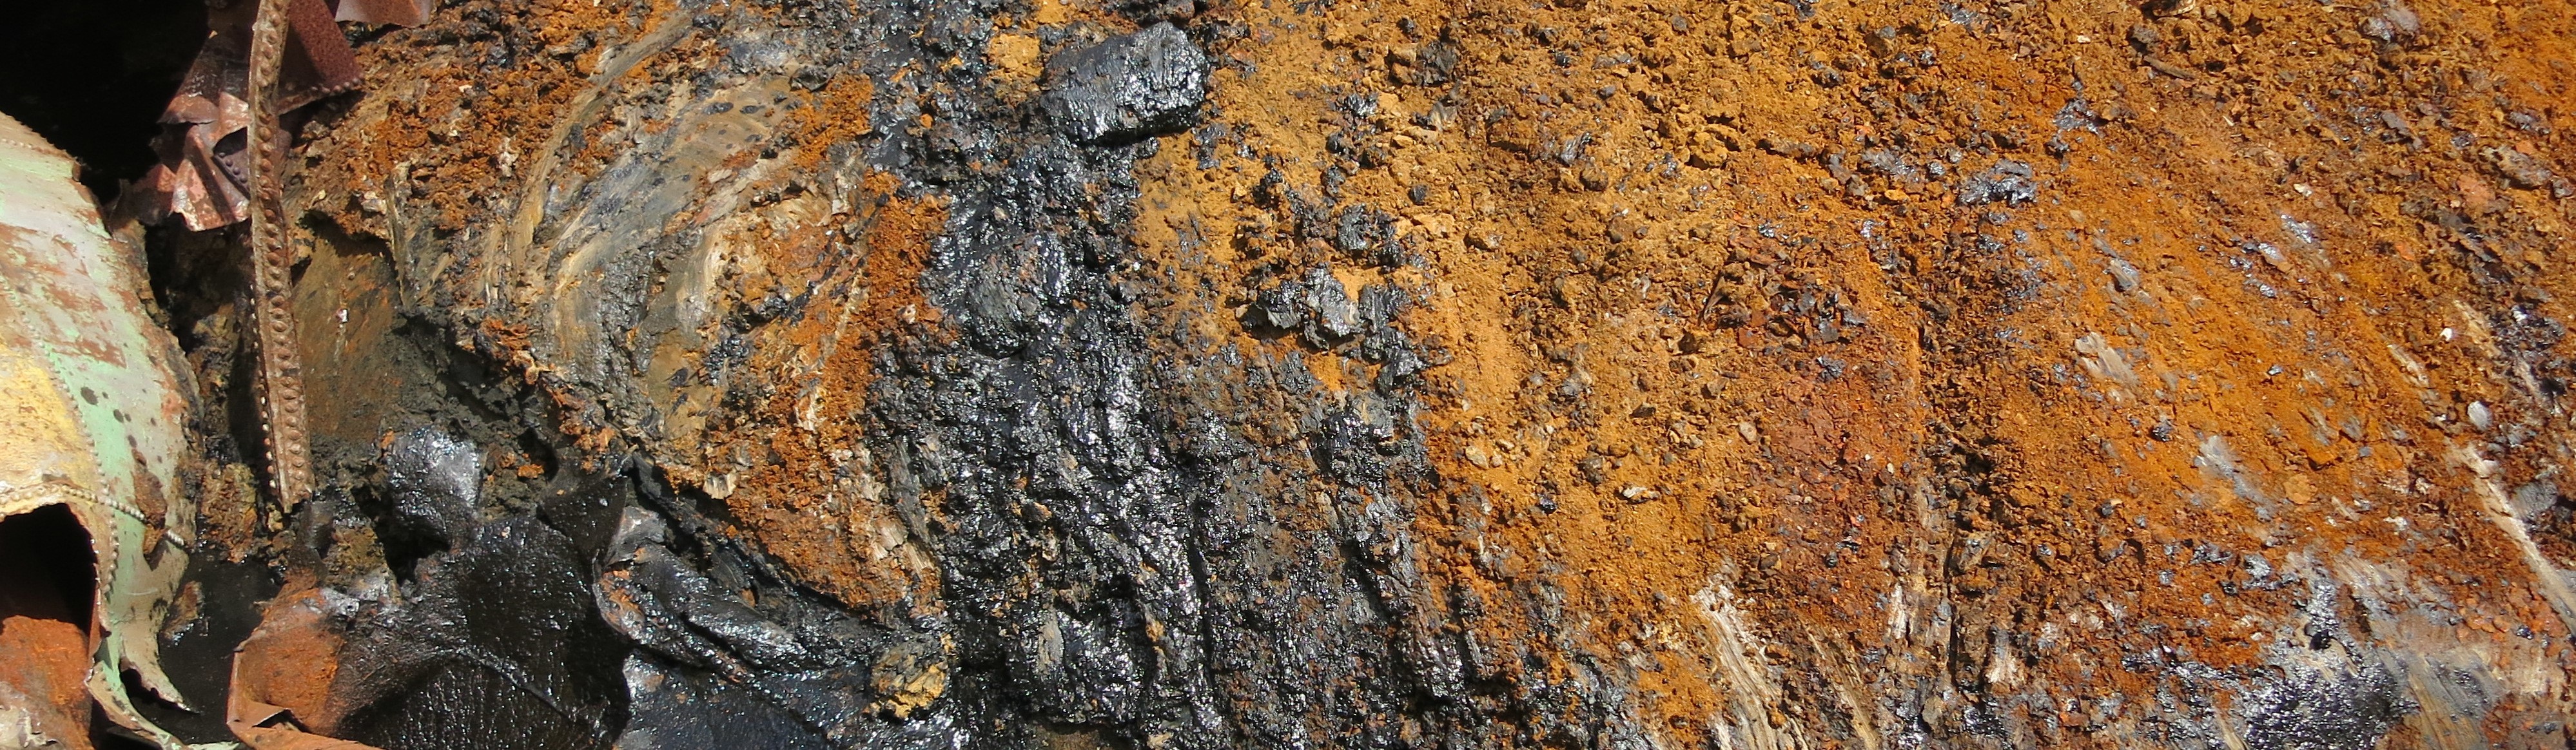 Close up of Gasworks Remediation Site showing rust gear and oil